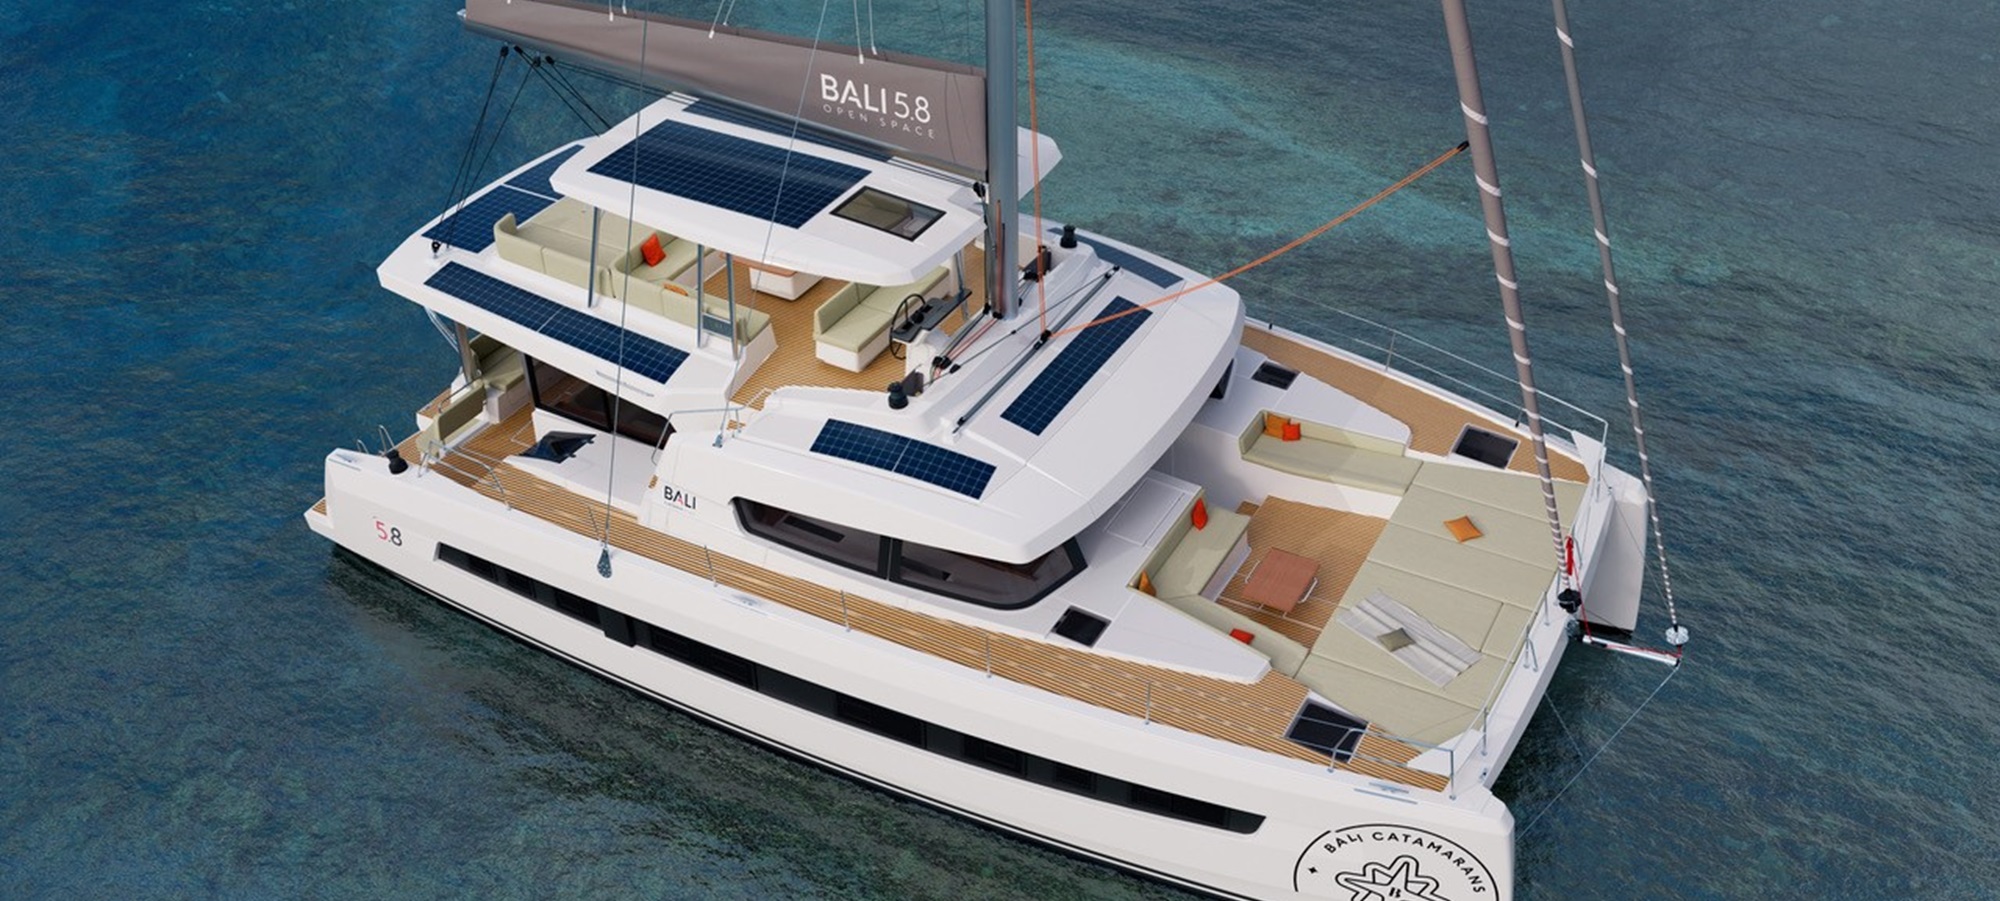 Introducing the Bali 5.8: A New Dimension in Luxury Catamarans